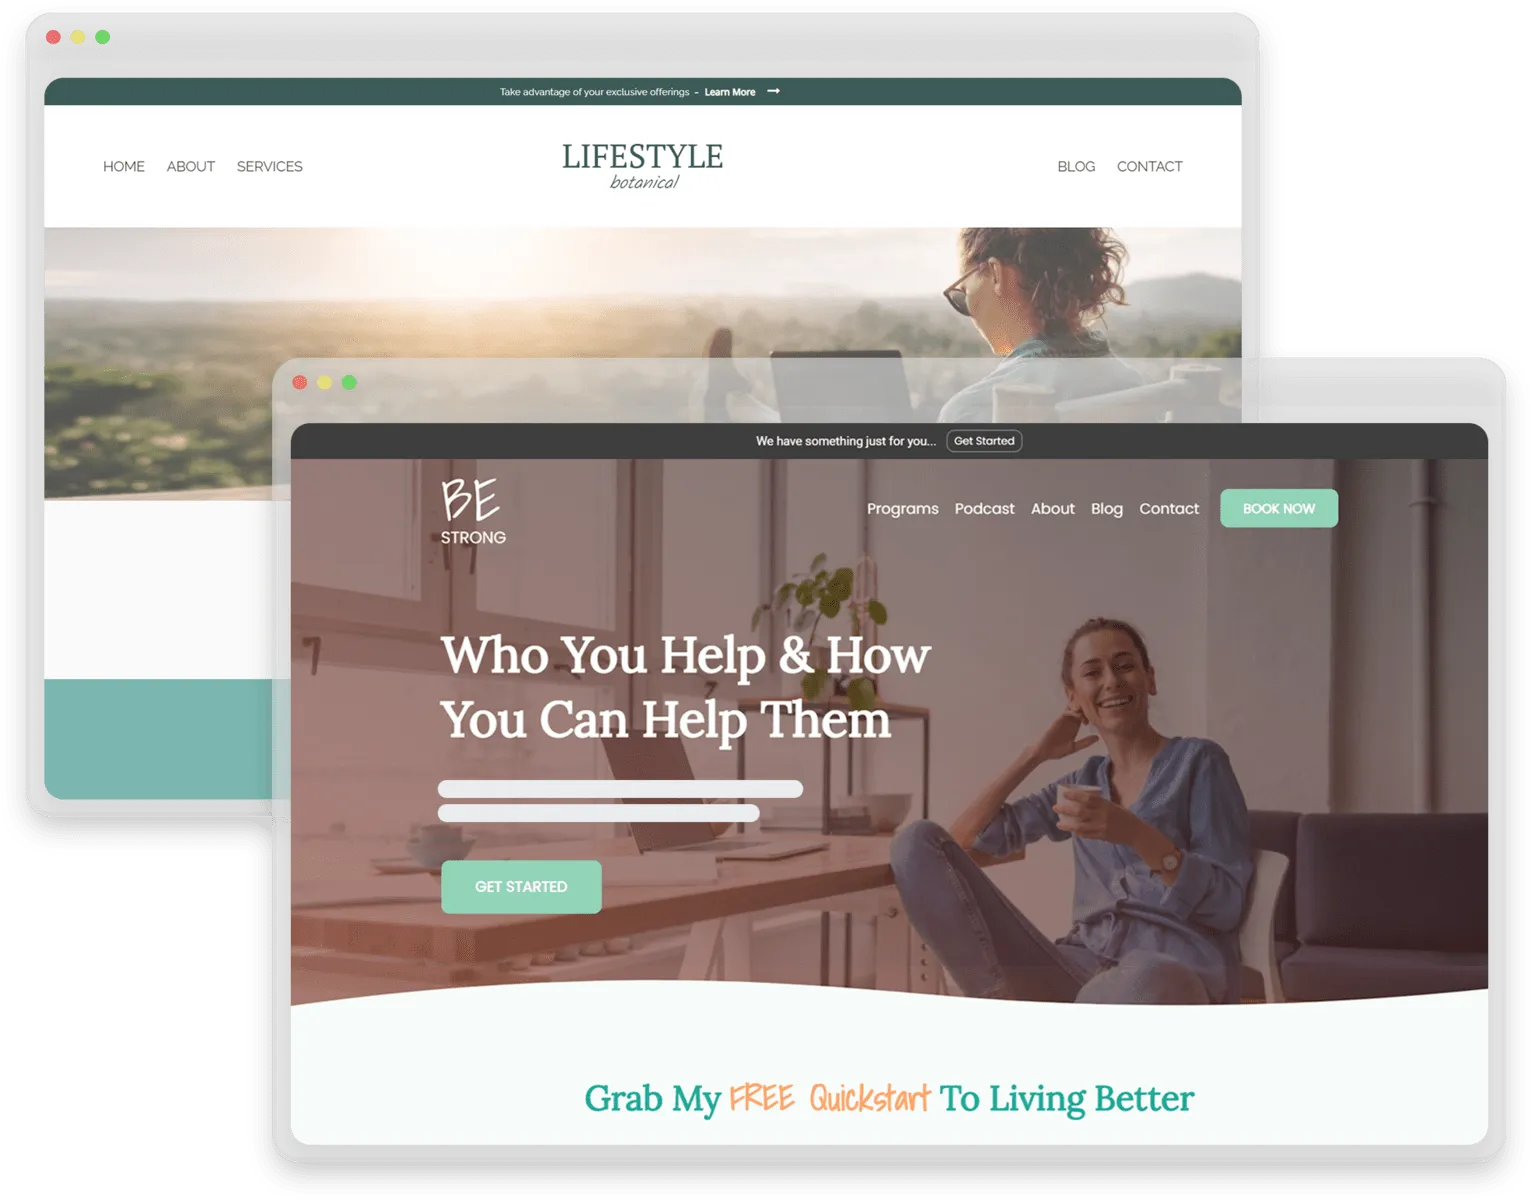 Two Patientbase website templates for lifestyle and wellness with navigation menus, headers, and calls-to-action.